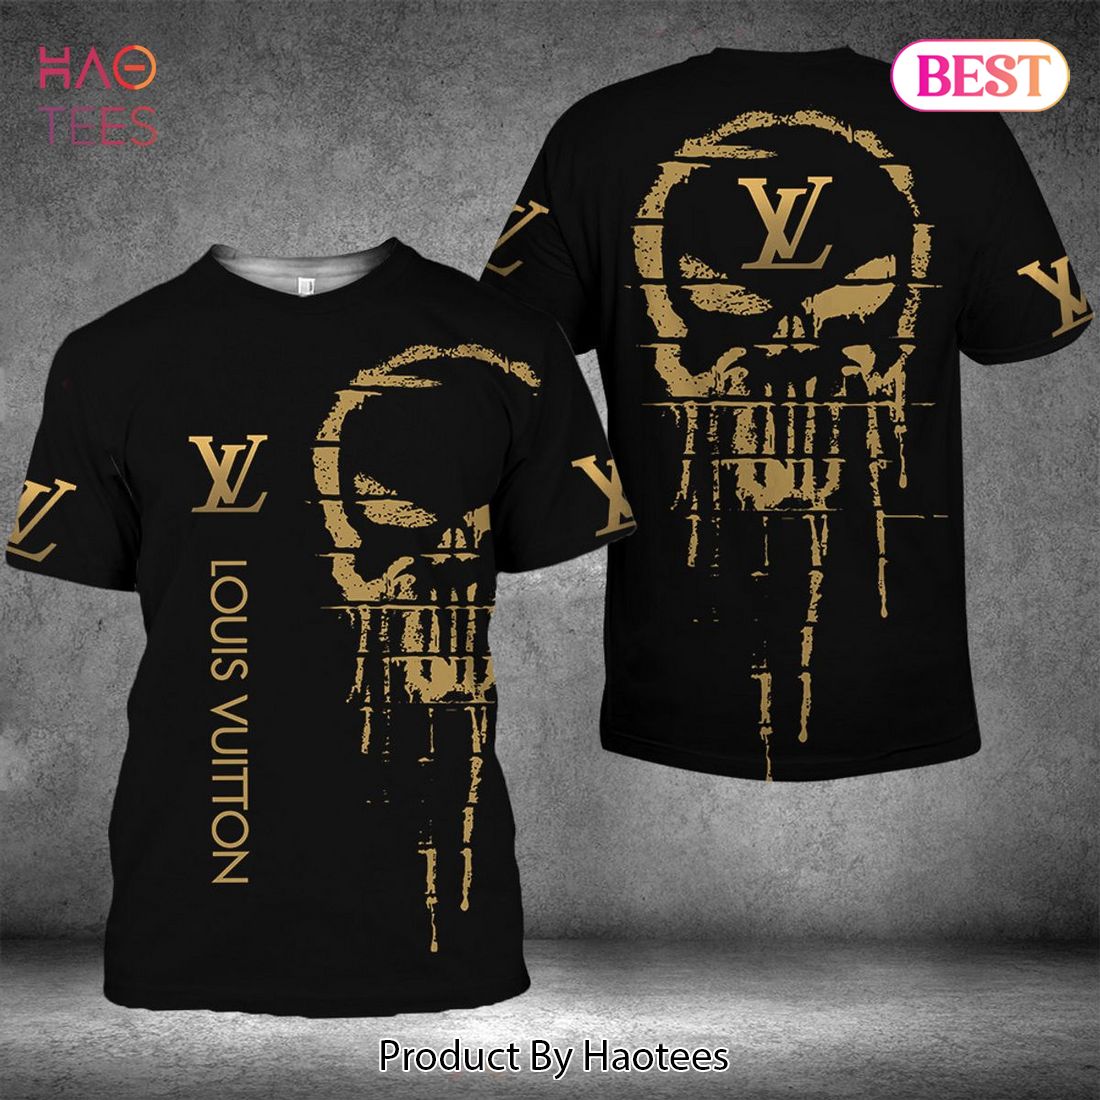 HOT Louis Vuitton Mysterious Black Gold Luxury Brand 3D T-Shirt Limited Edition